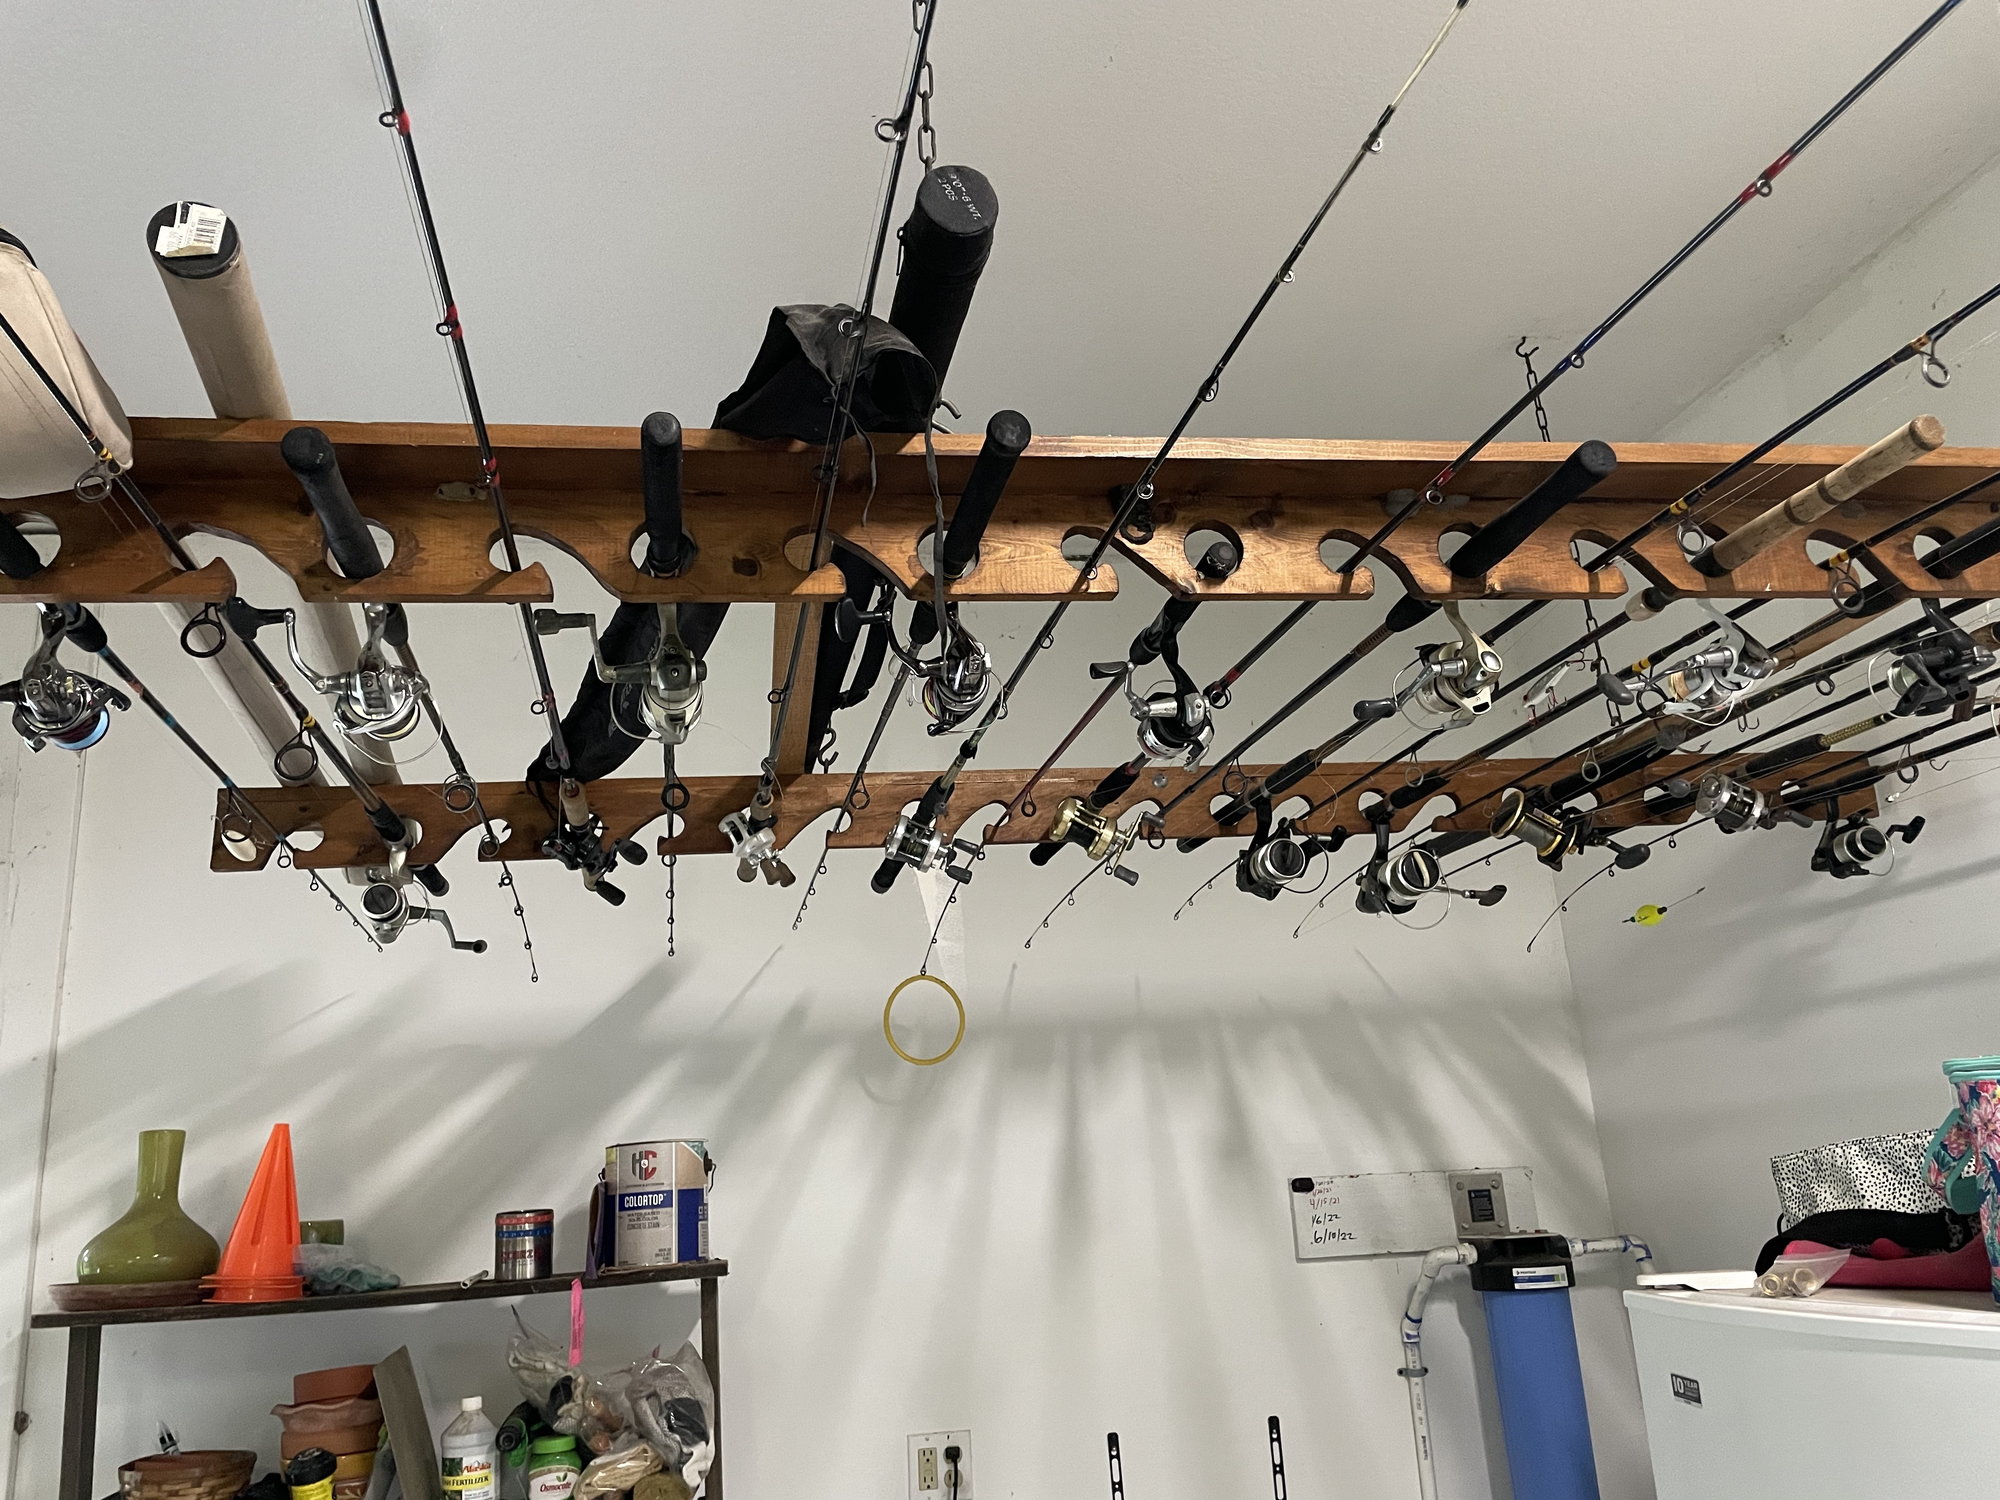 Garage/Indoor Rod Storage Ideas - The Hull Truth - Boating and